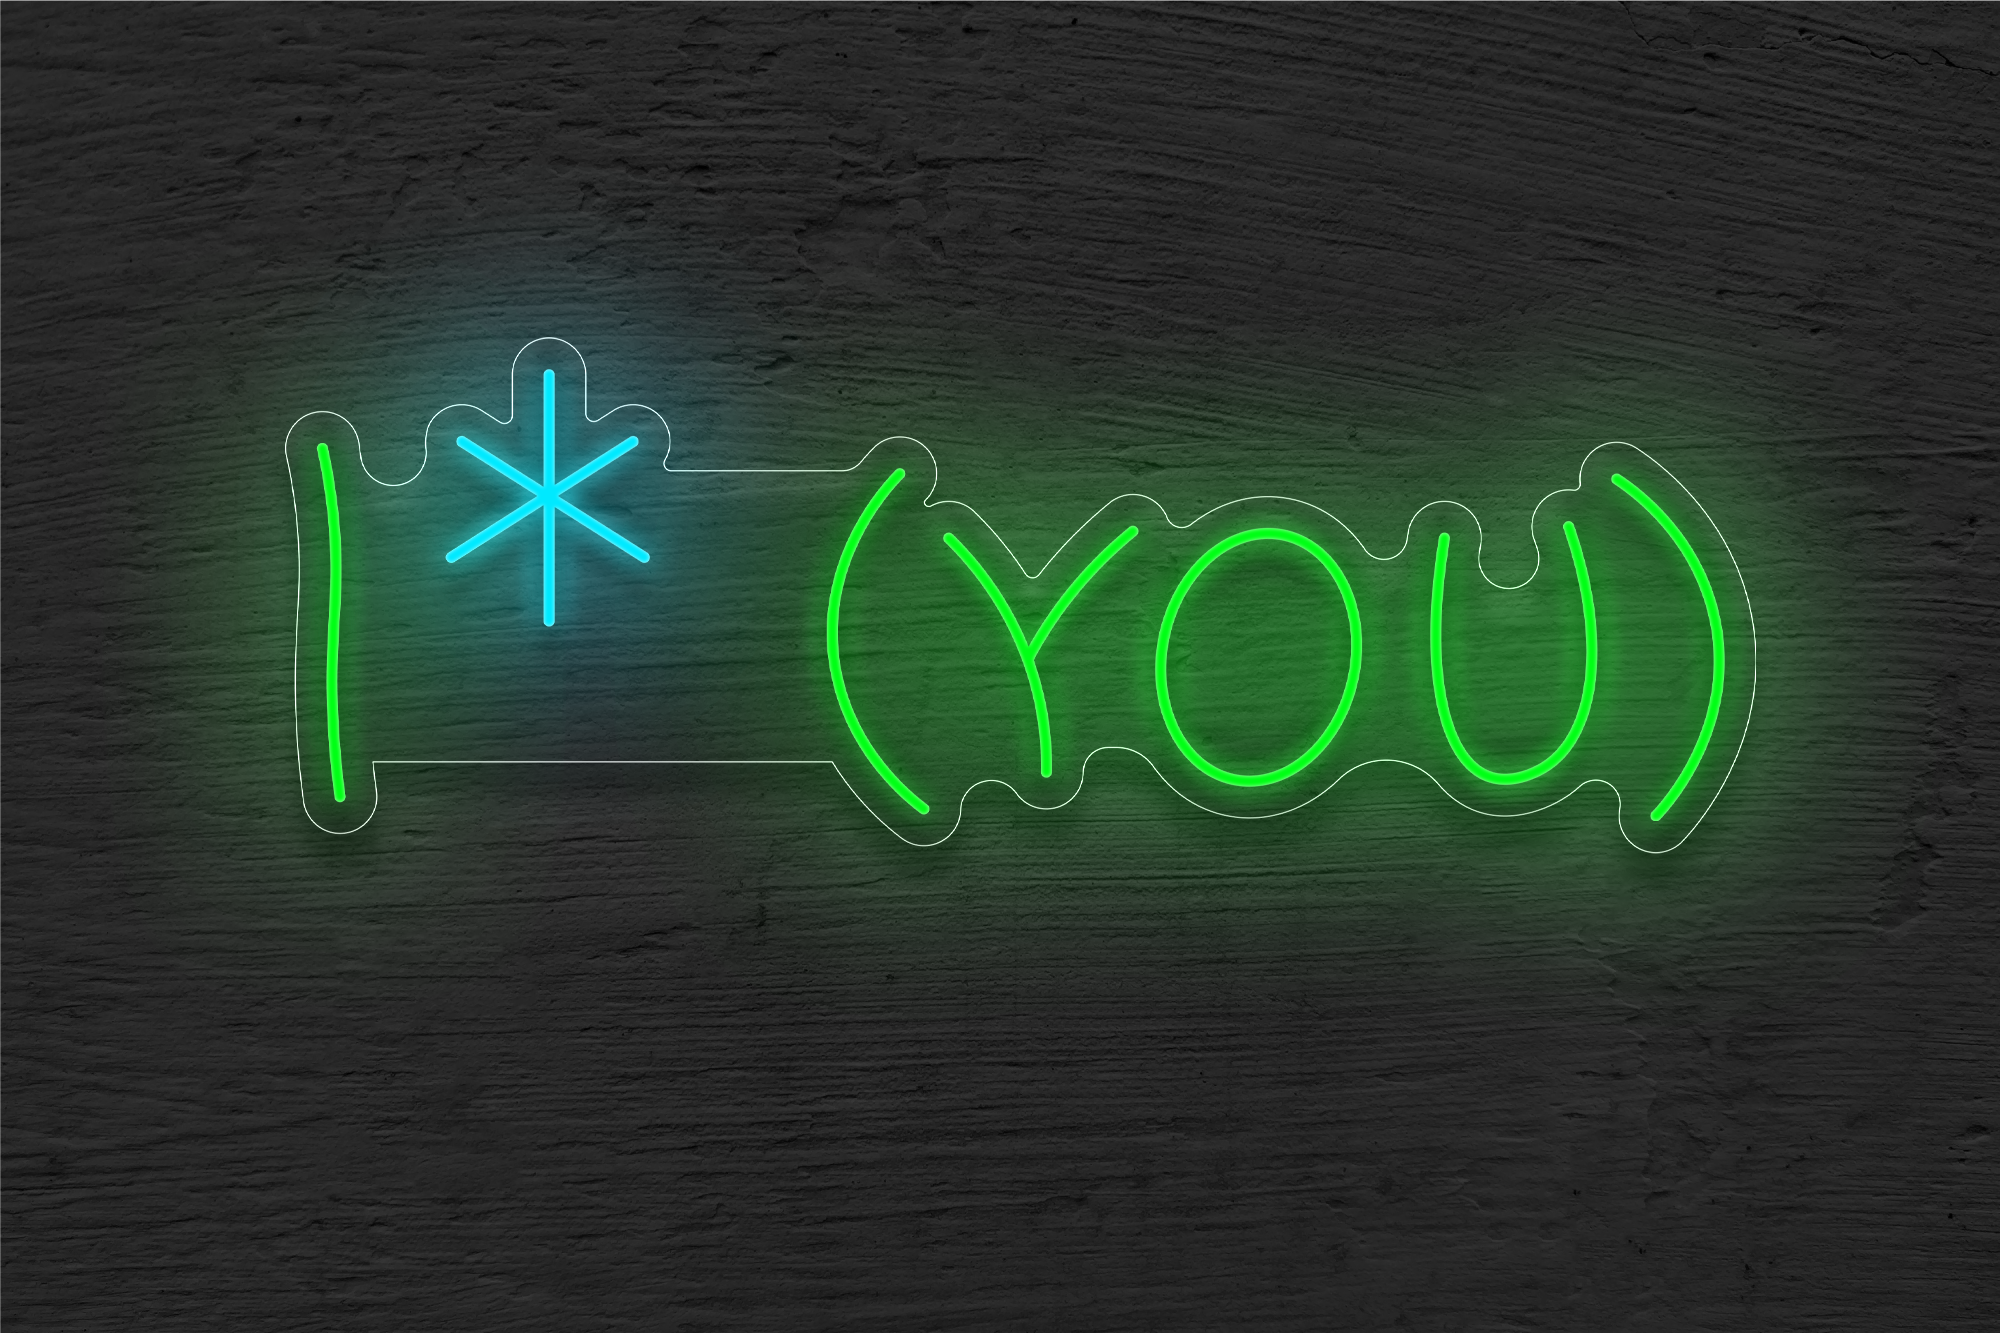 "I * YOU" LED Neon Sign